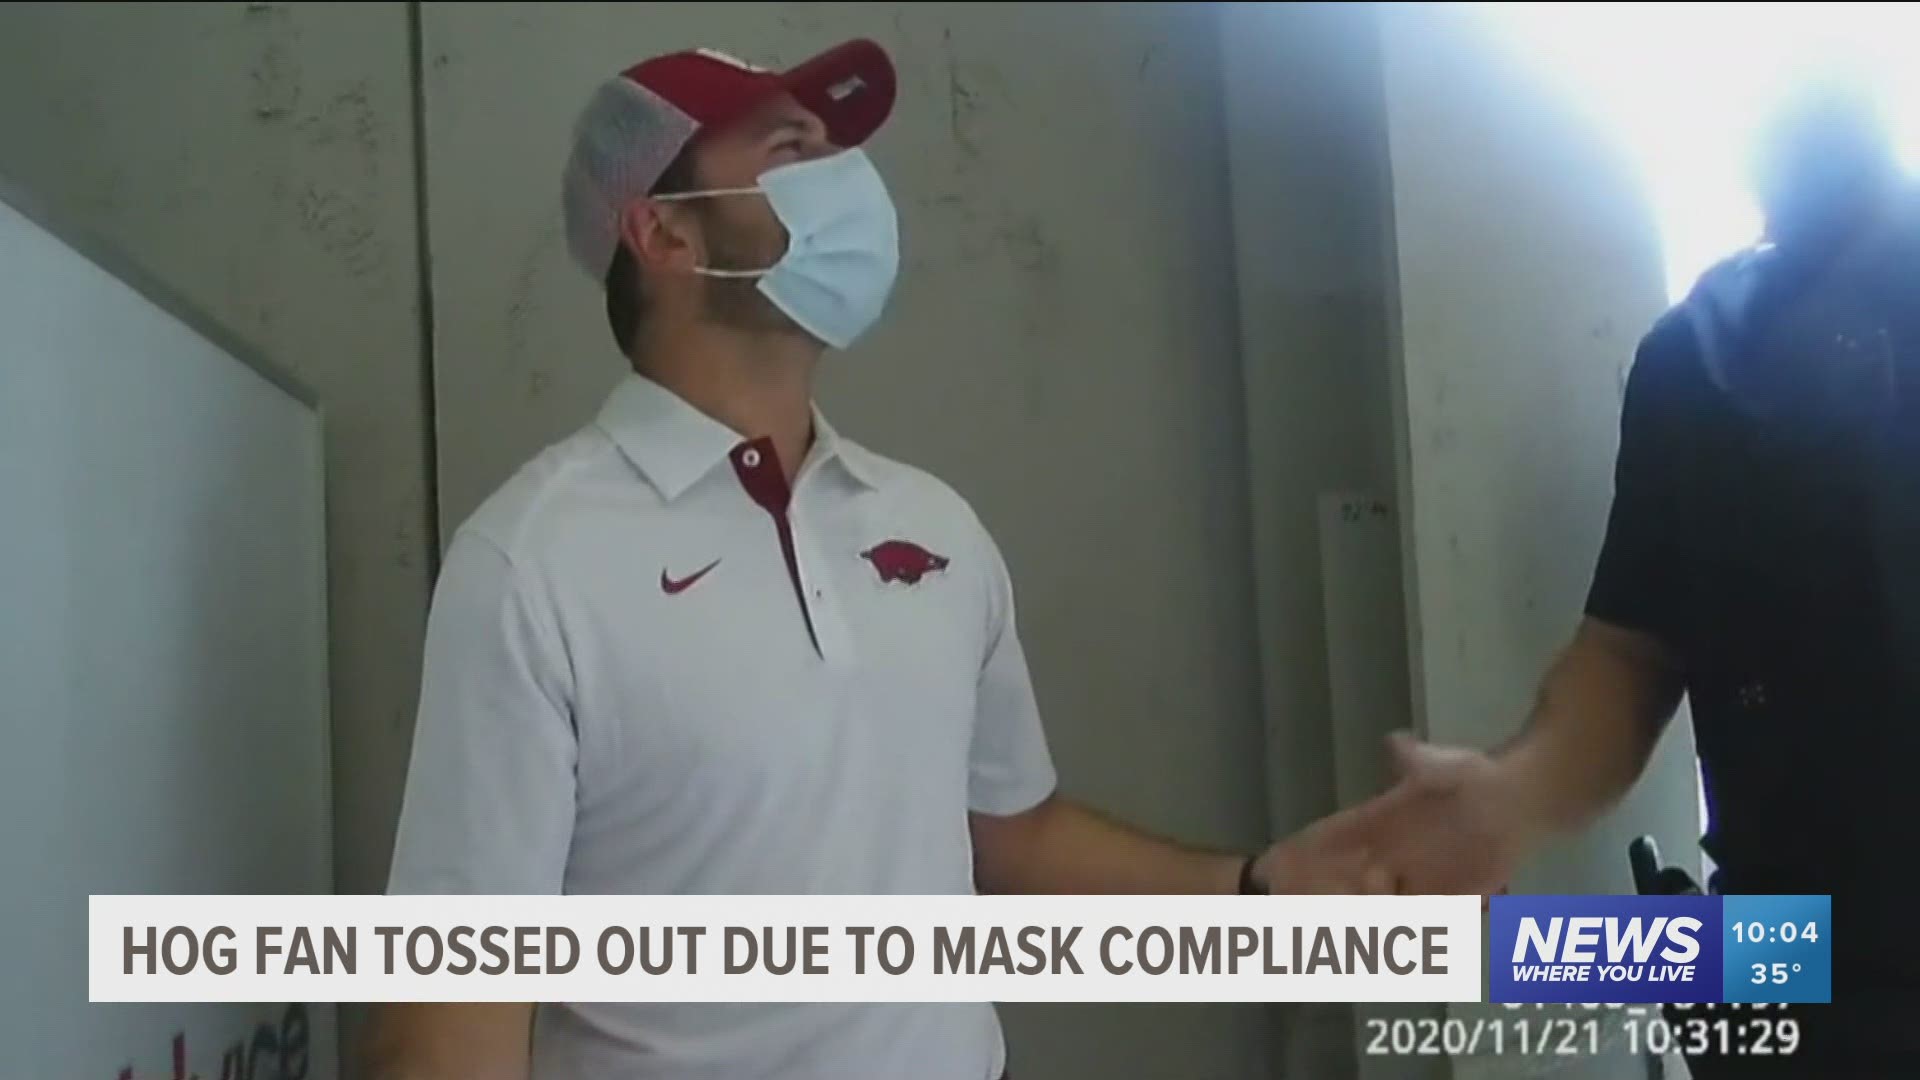 University of Arkansas Police says this incident is the only problem they've dealt with this football season concerning the mask mandate at Razorback Stadium.